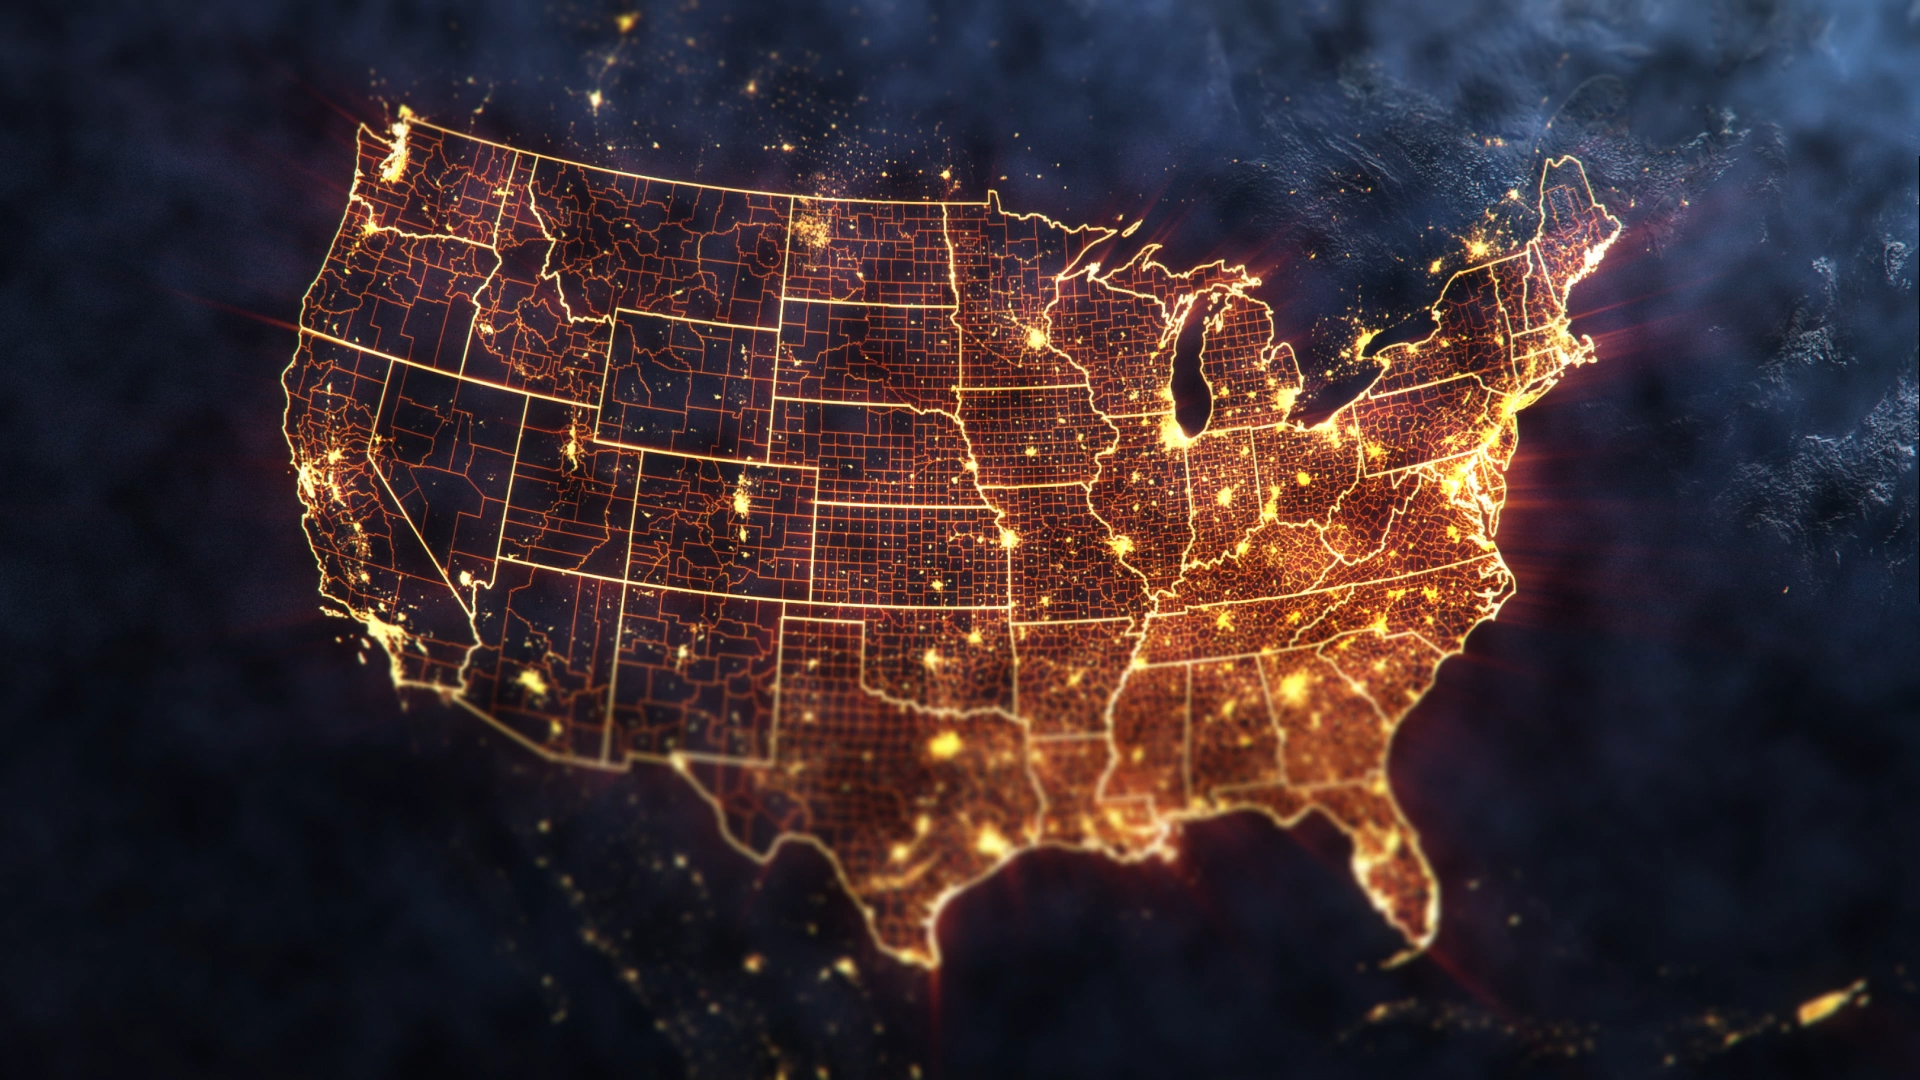 A satellite view of the United States at night - an image from the explainer video created for Conquest Cyber.